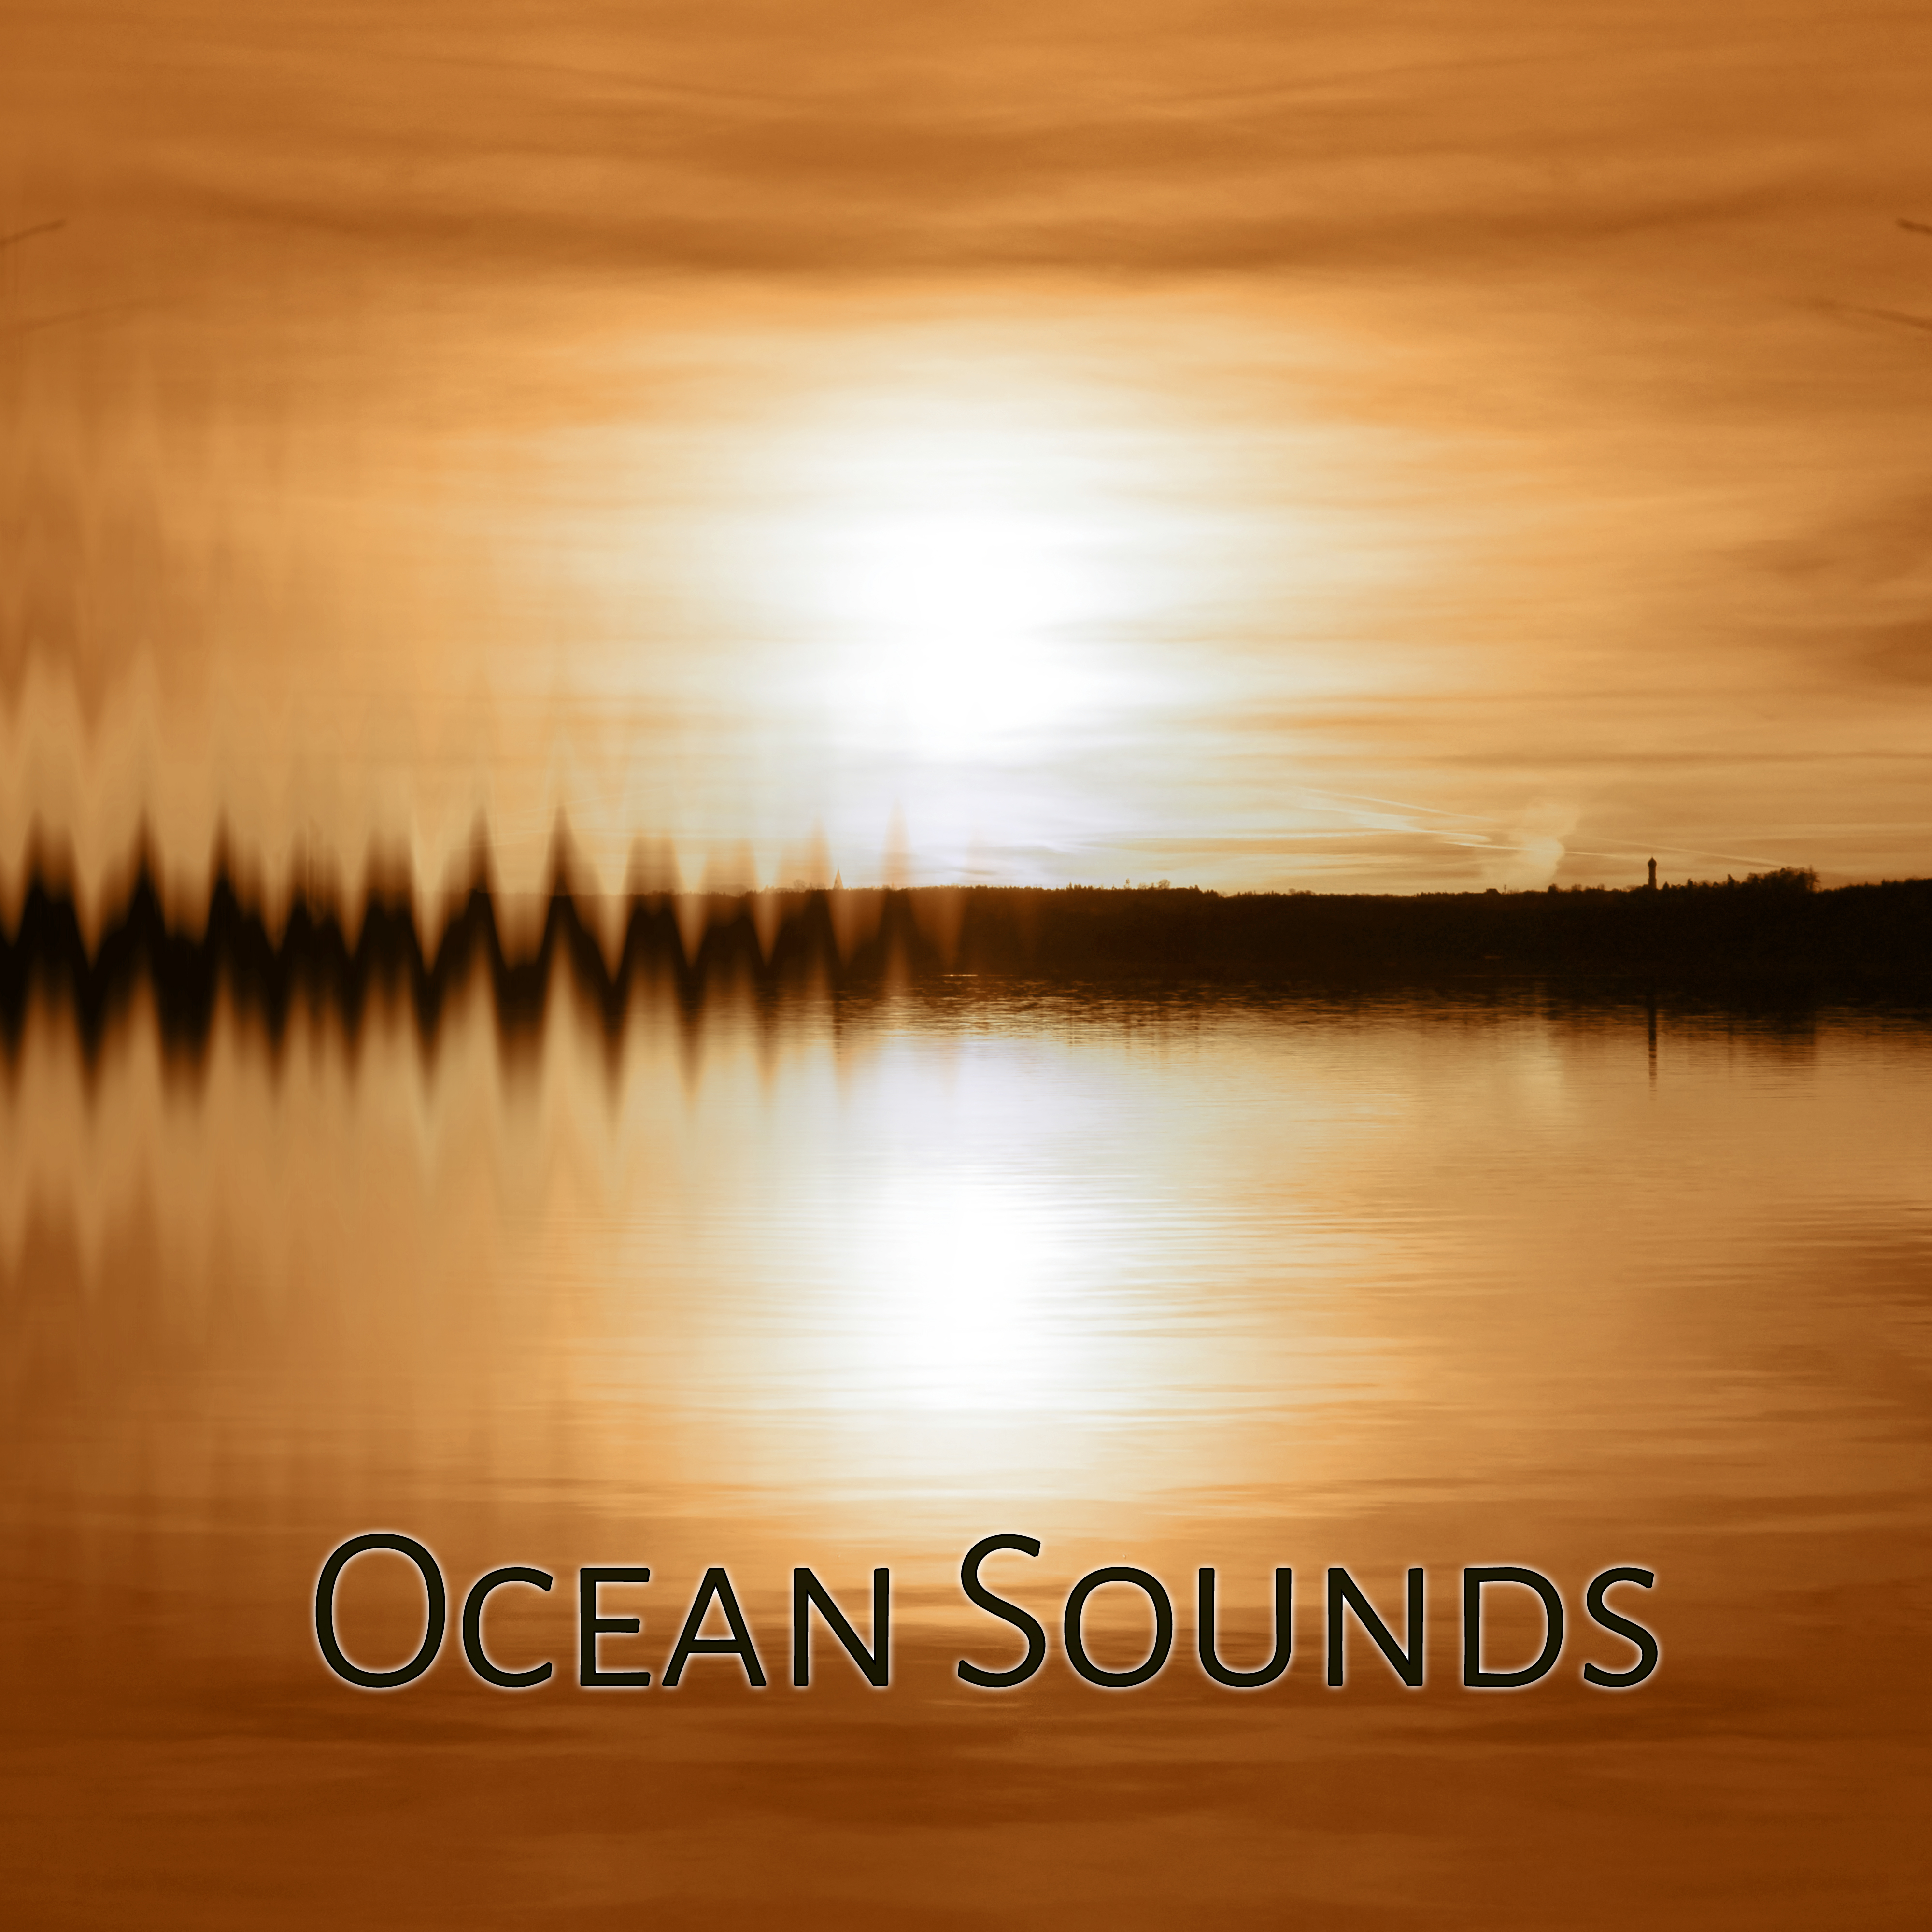 Ocean Sounds - Relaxing Nature Sounds to Calm Down, Yoga & Meditation, Natural Sleep Aids